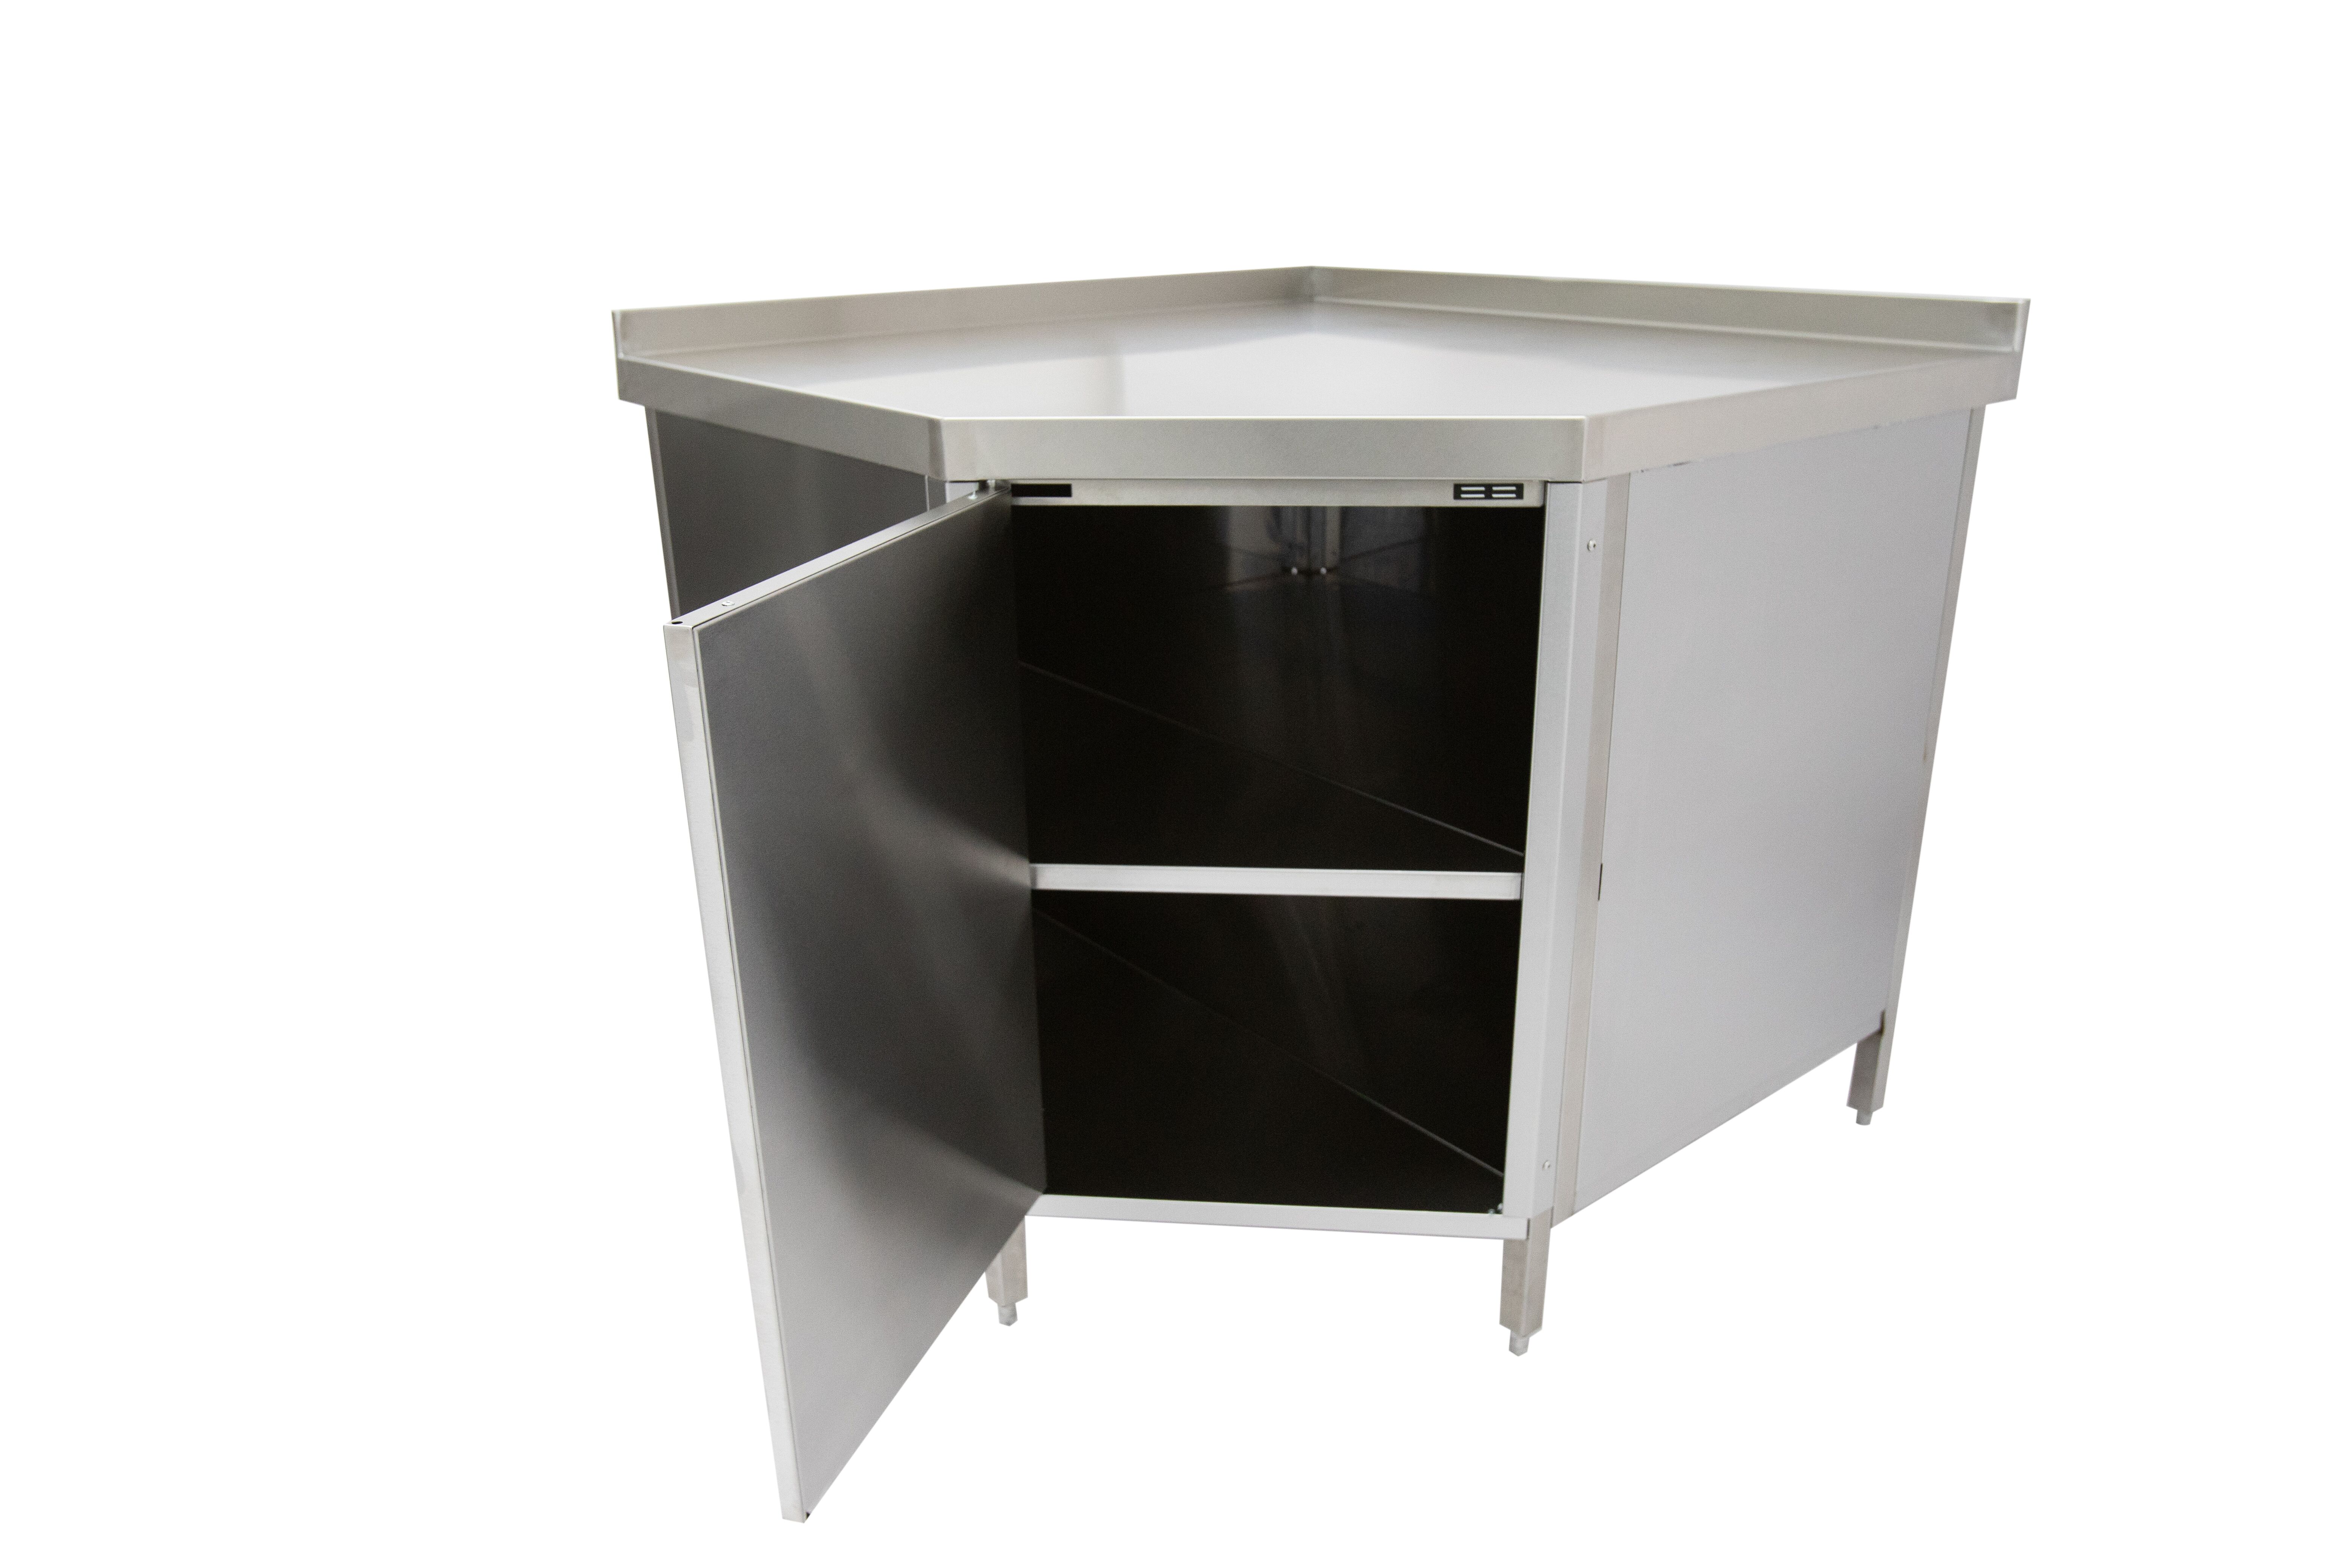 Parry CUPBD600 - Stainless Steel Corner Unit